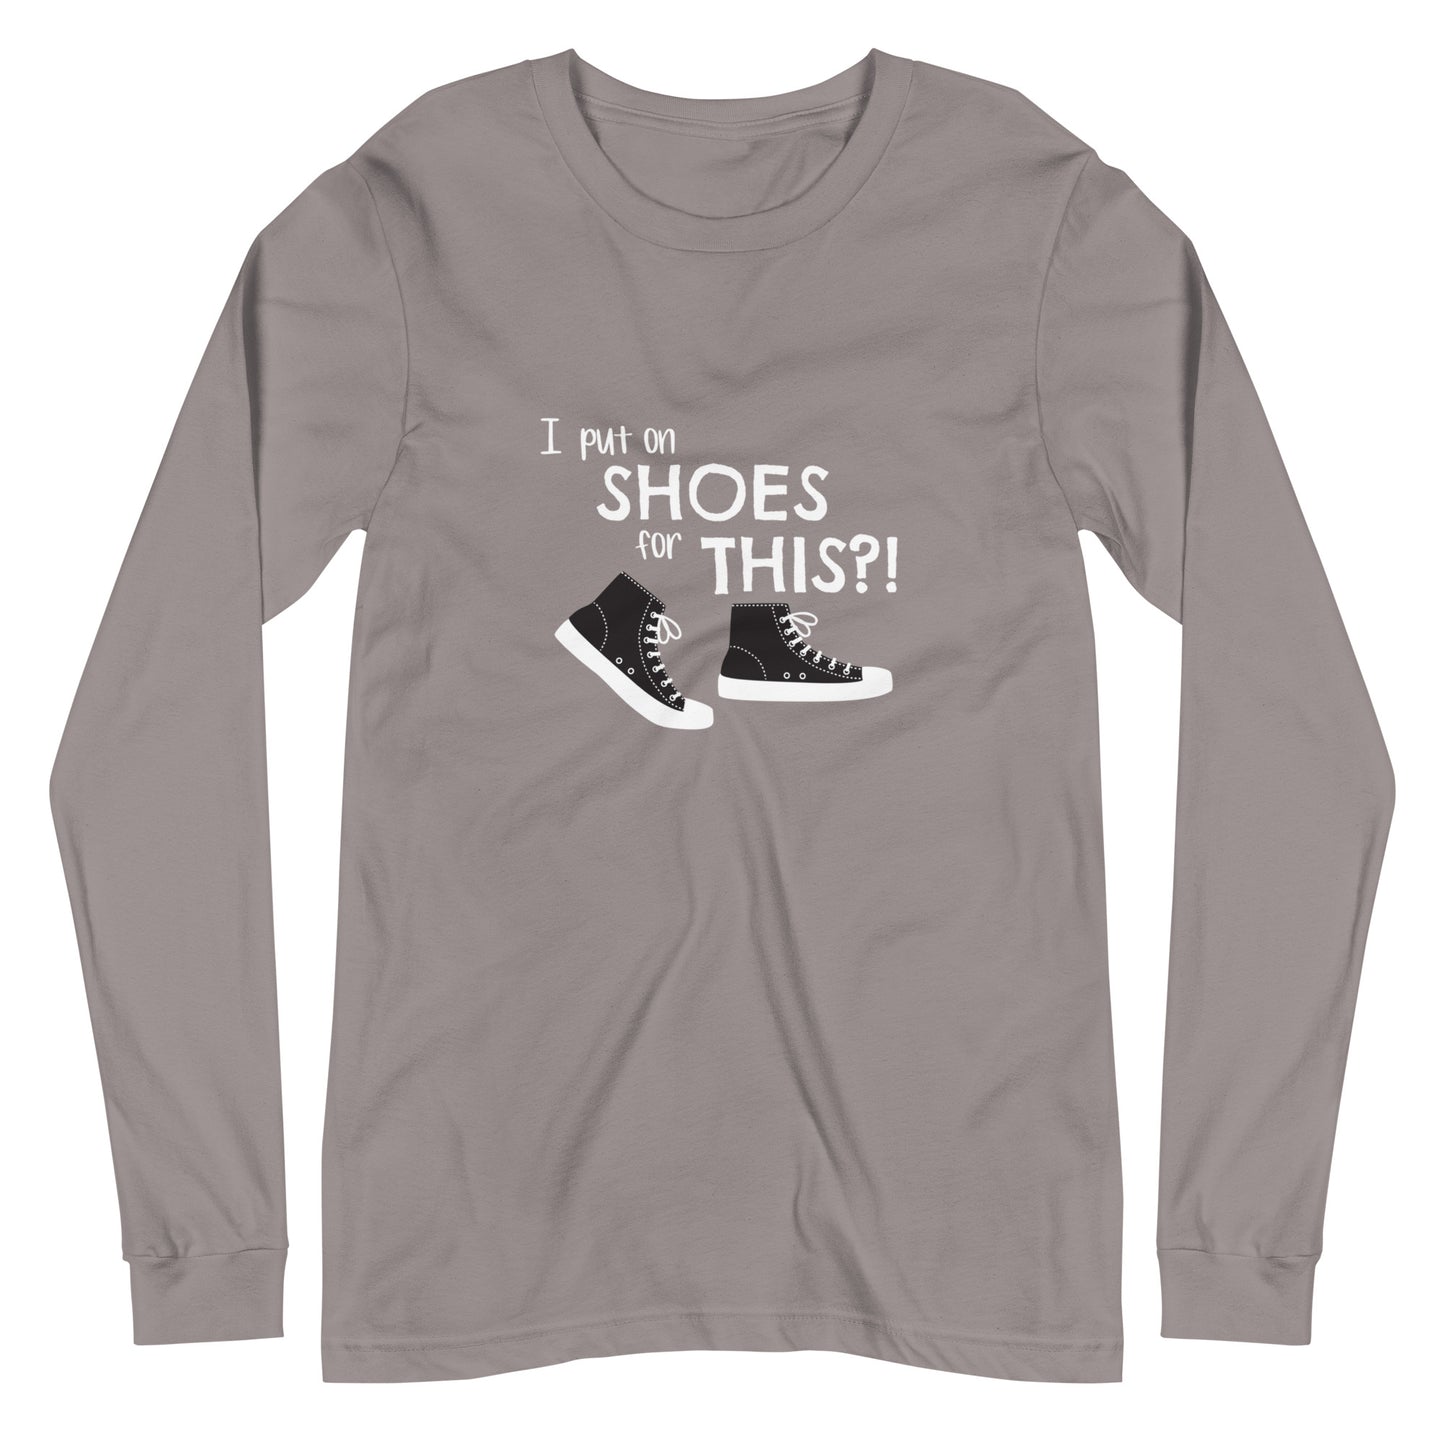 Storm grey long-sleeve t-shirt with graphic of black and white canvas "chuck" sneakers and text: "I put on SHOES for THIS?!"